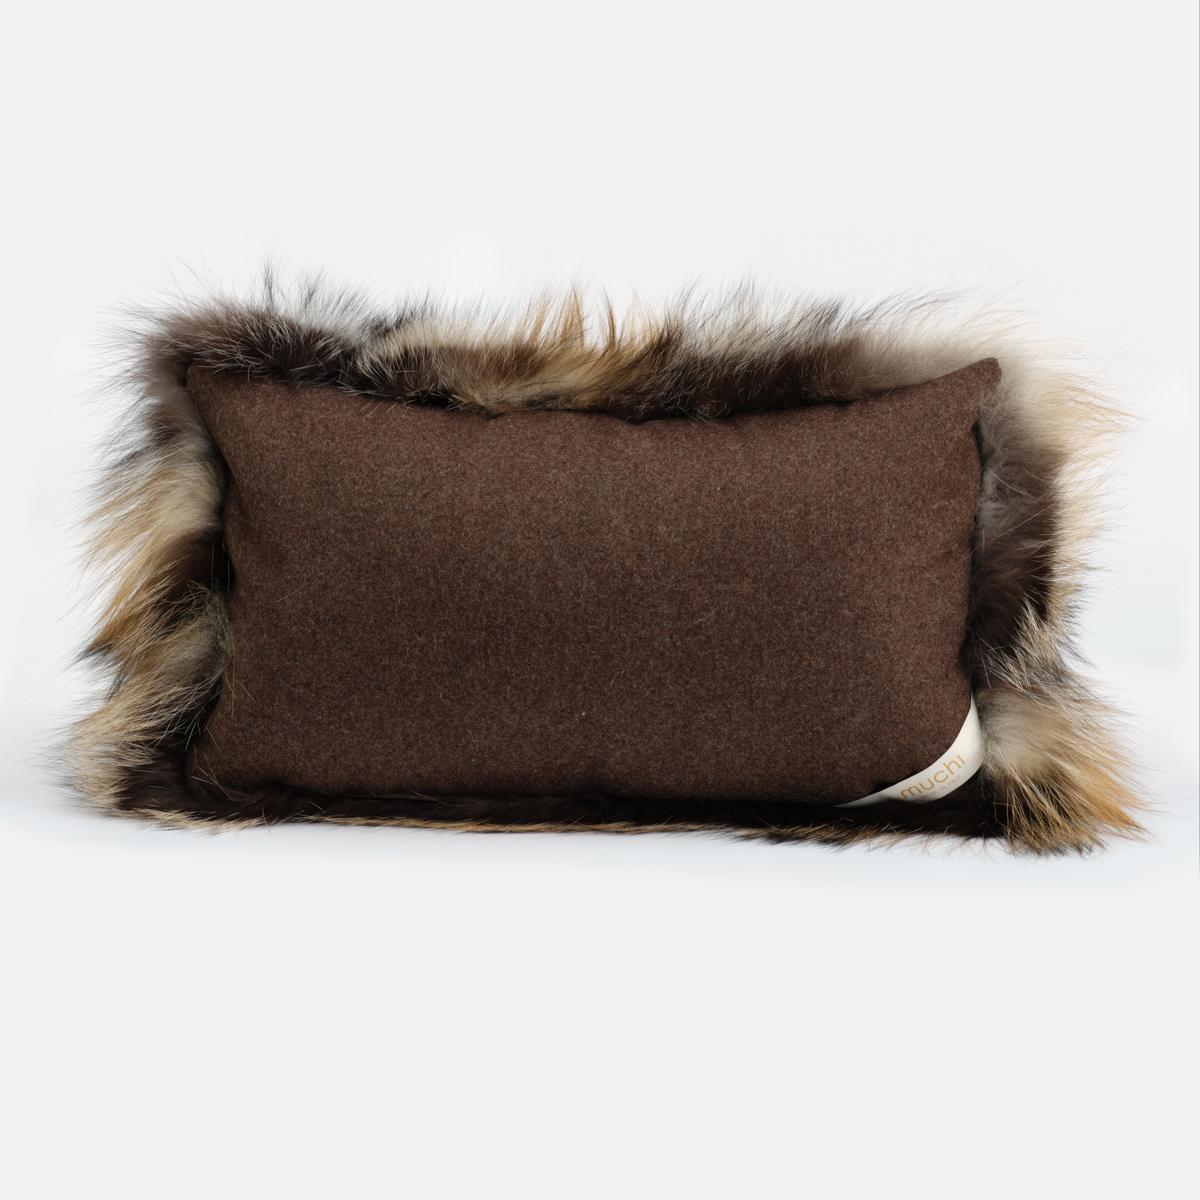 Other Gold Brown Natural Fur Pillow Cushion by Muchi Decor For Sale